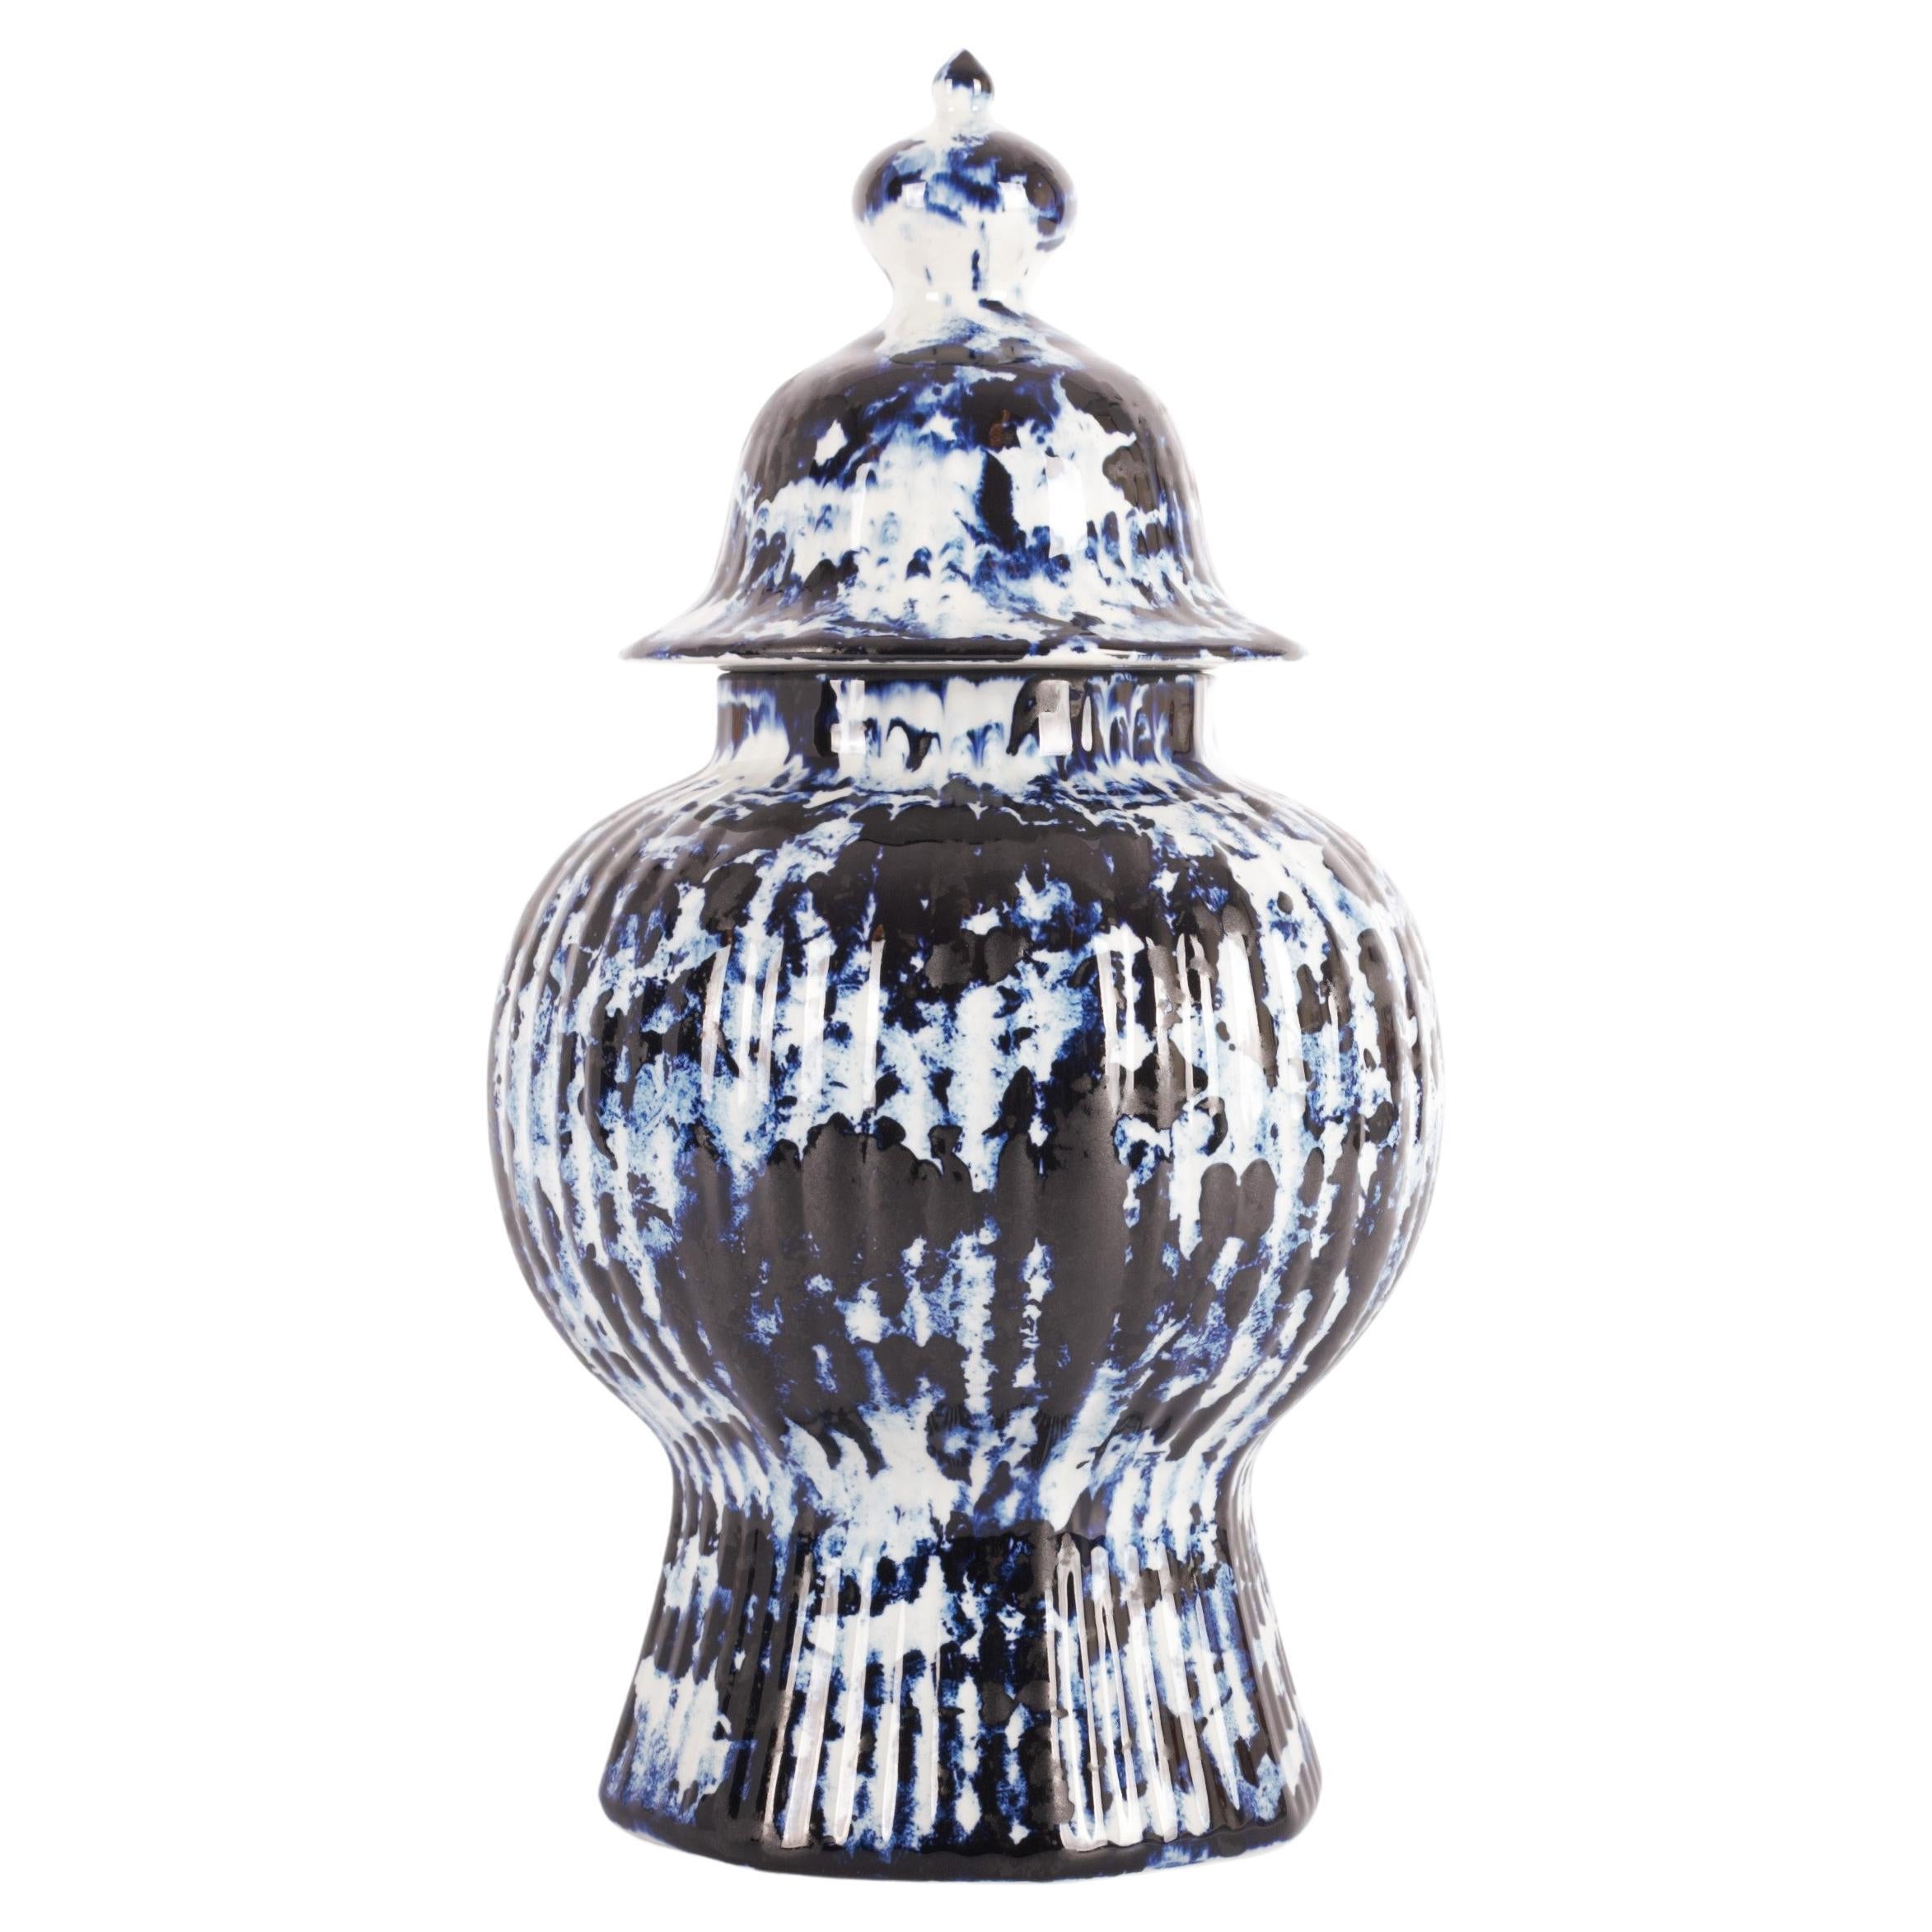 Delft Blue Vase with Lid 37cm #1, by Marcel Wanders, Hand Painted, 2006, Unique